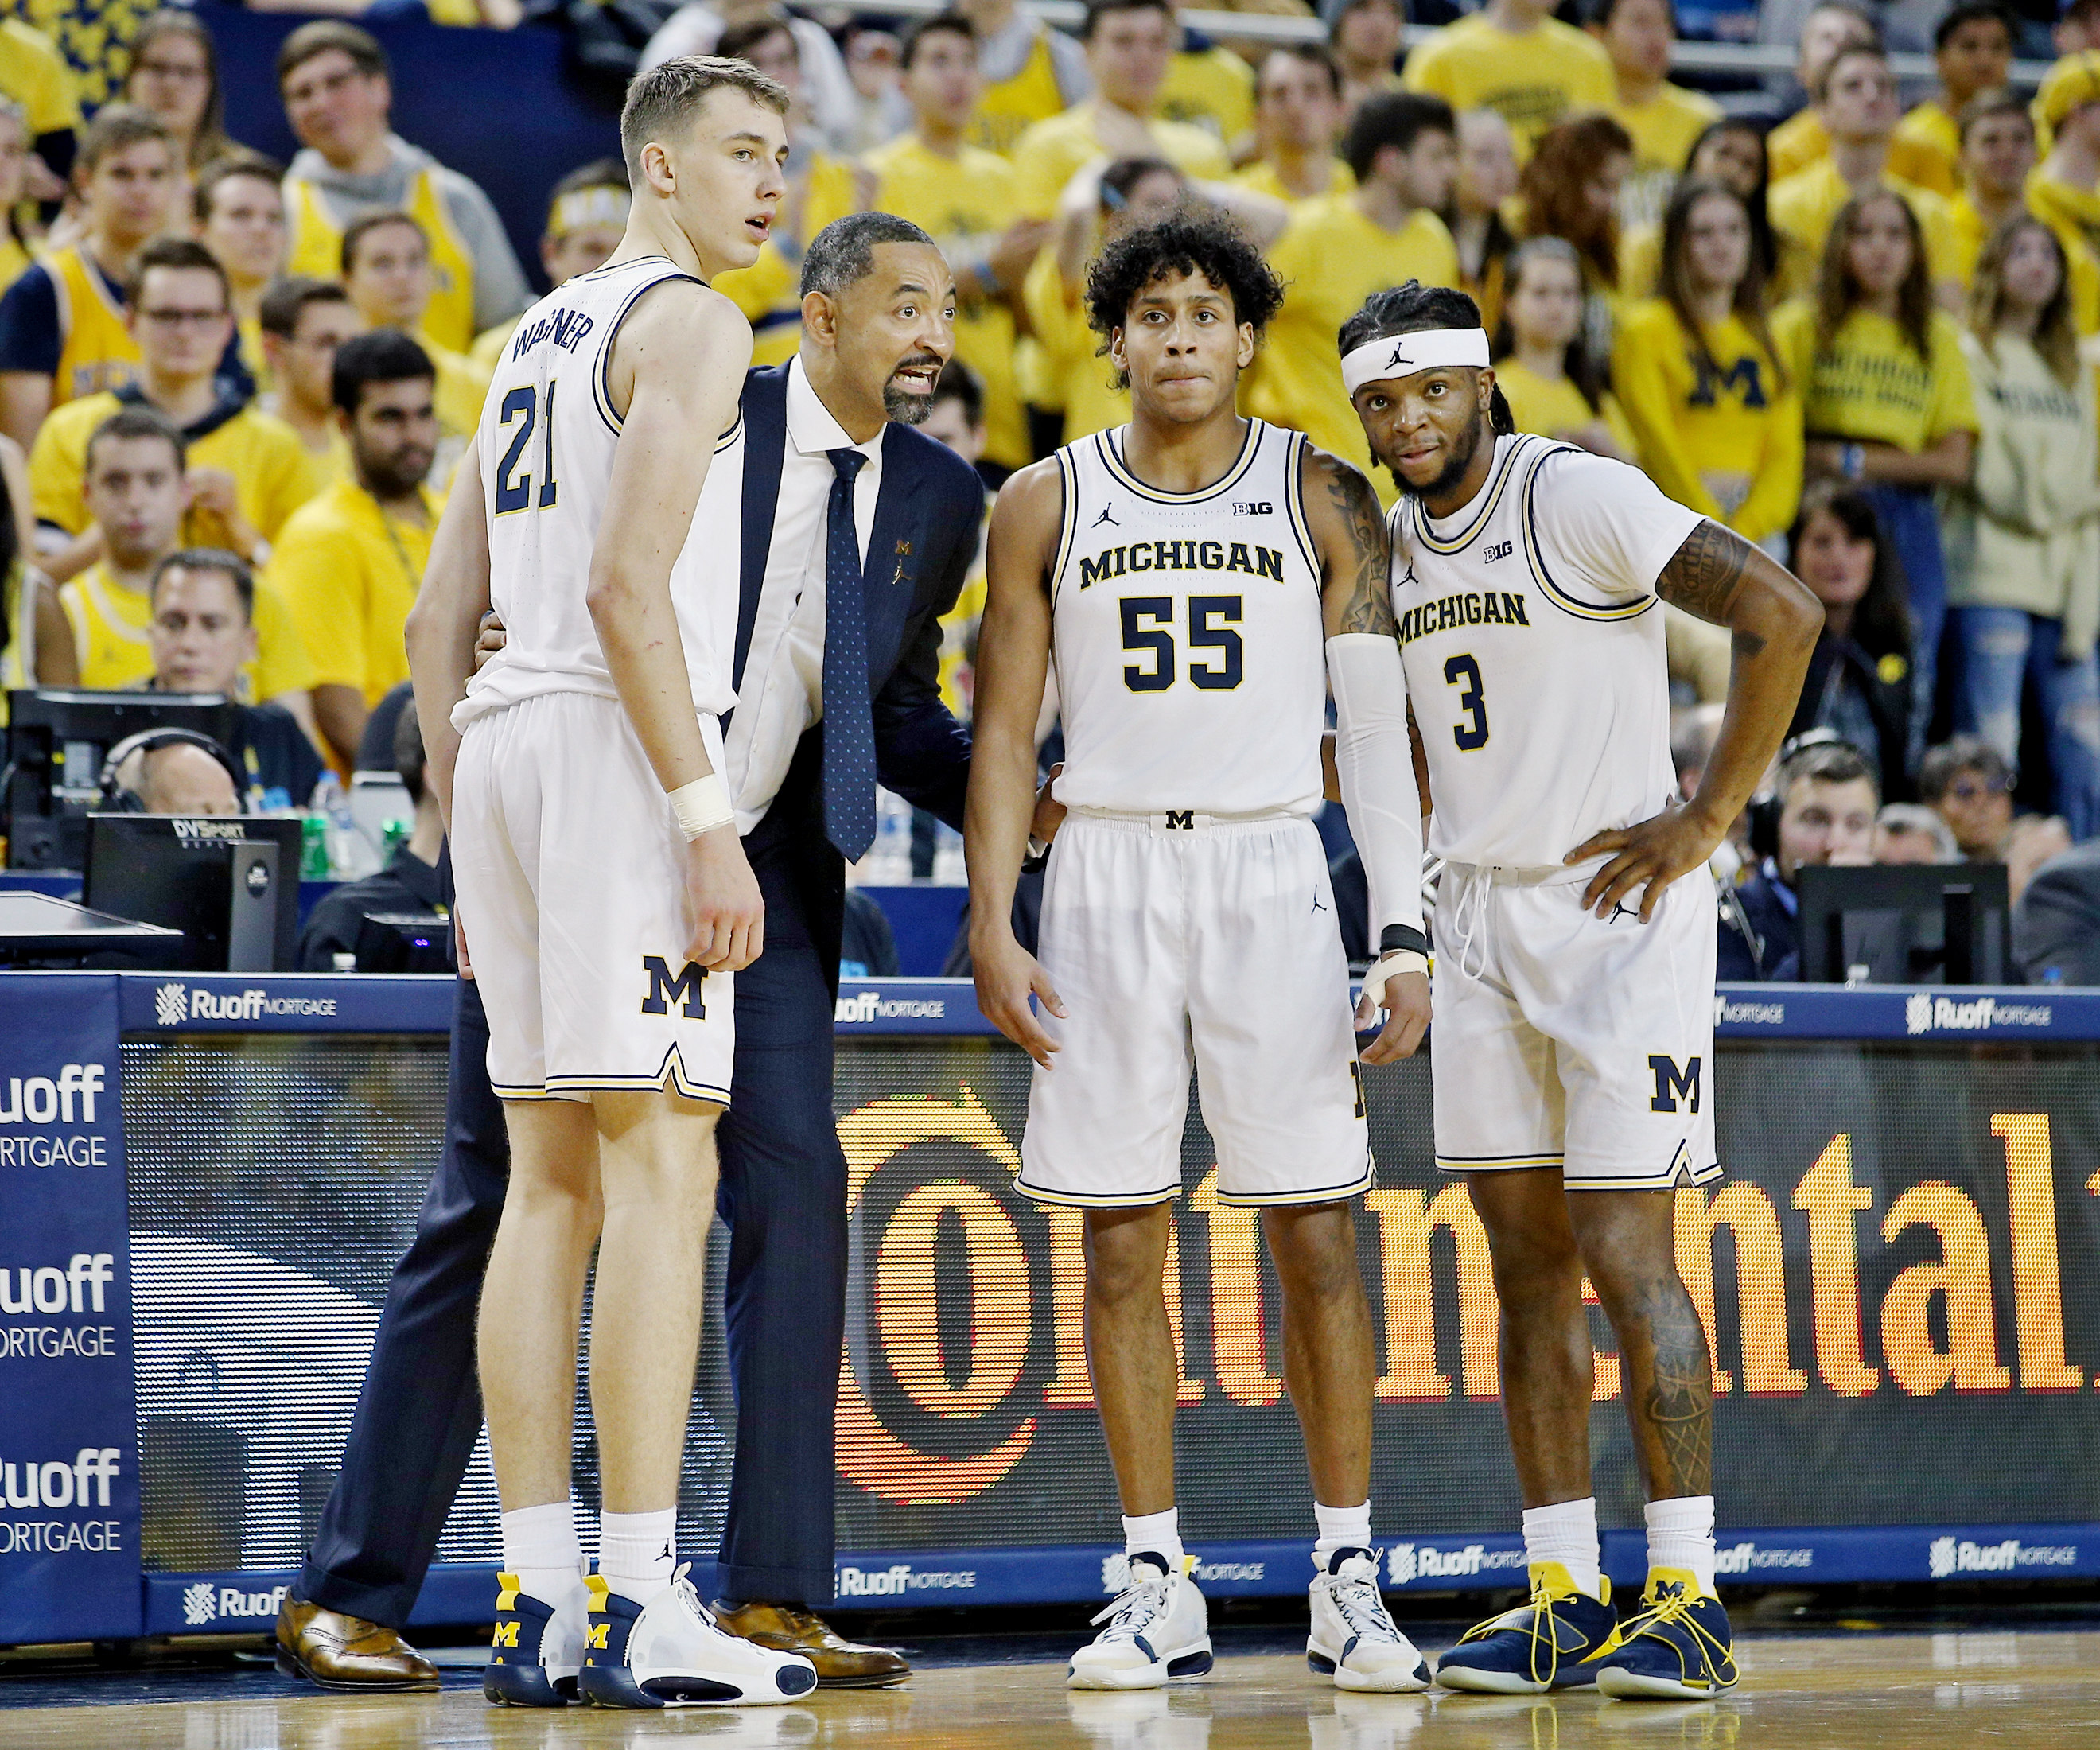 Michigan basketball unveils jersey numbers for freshmen, others